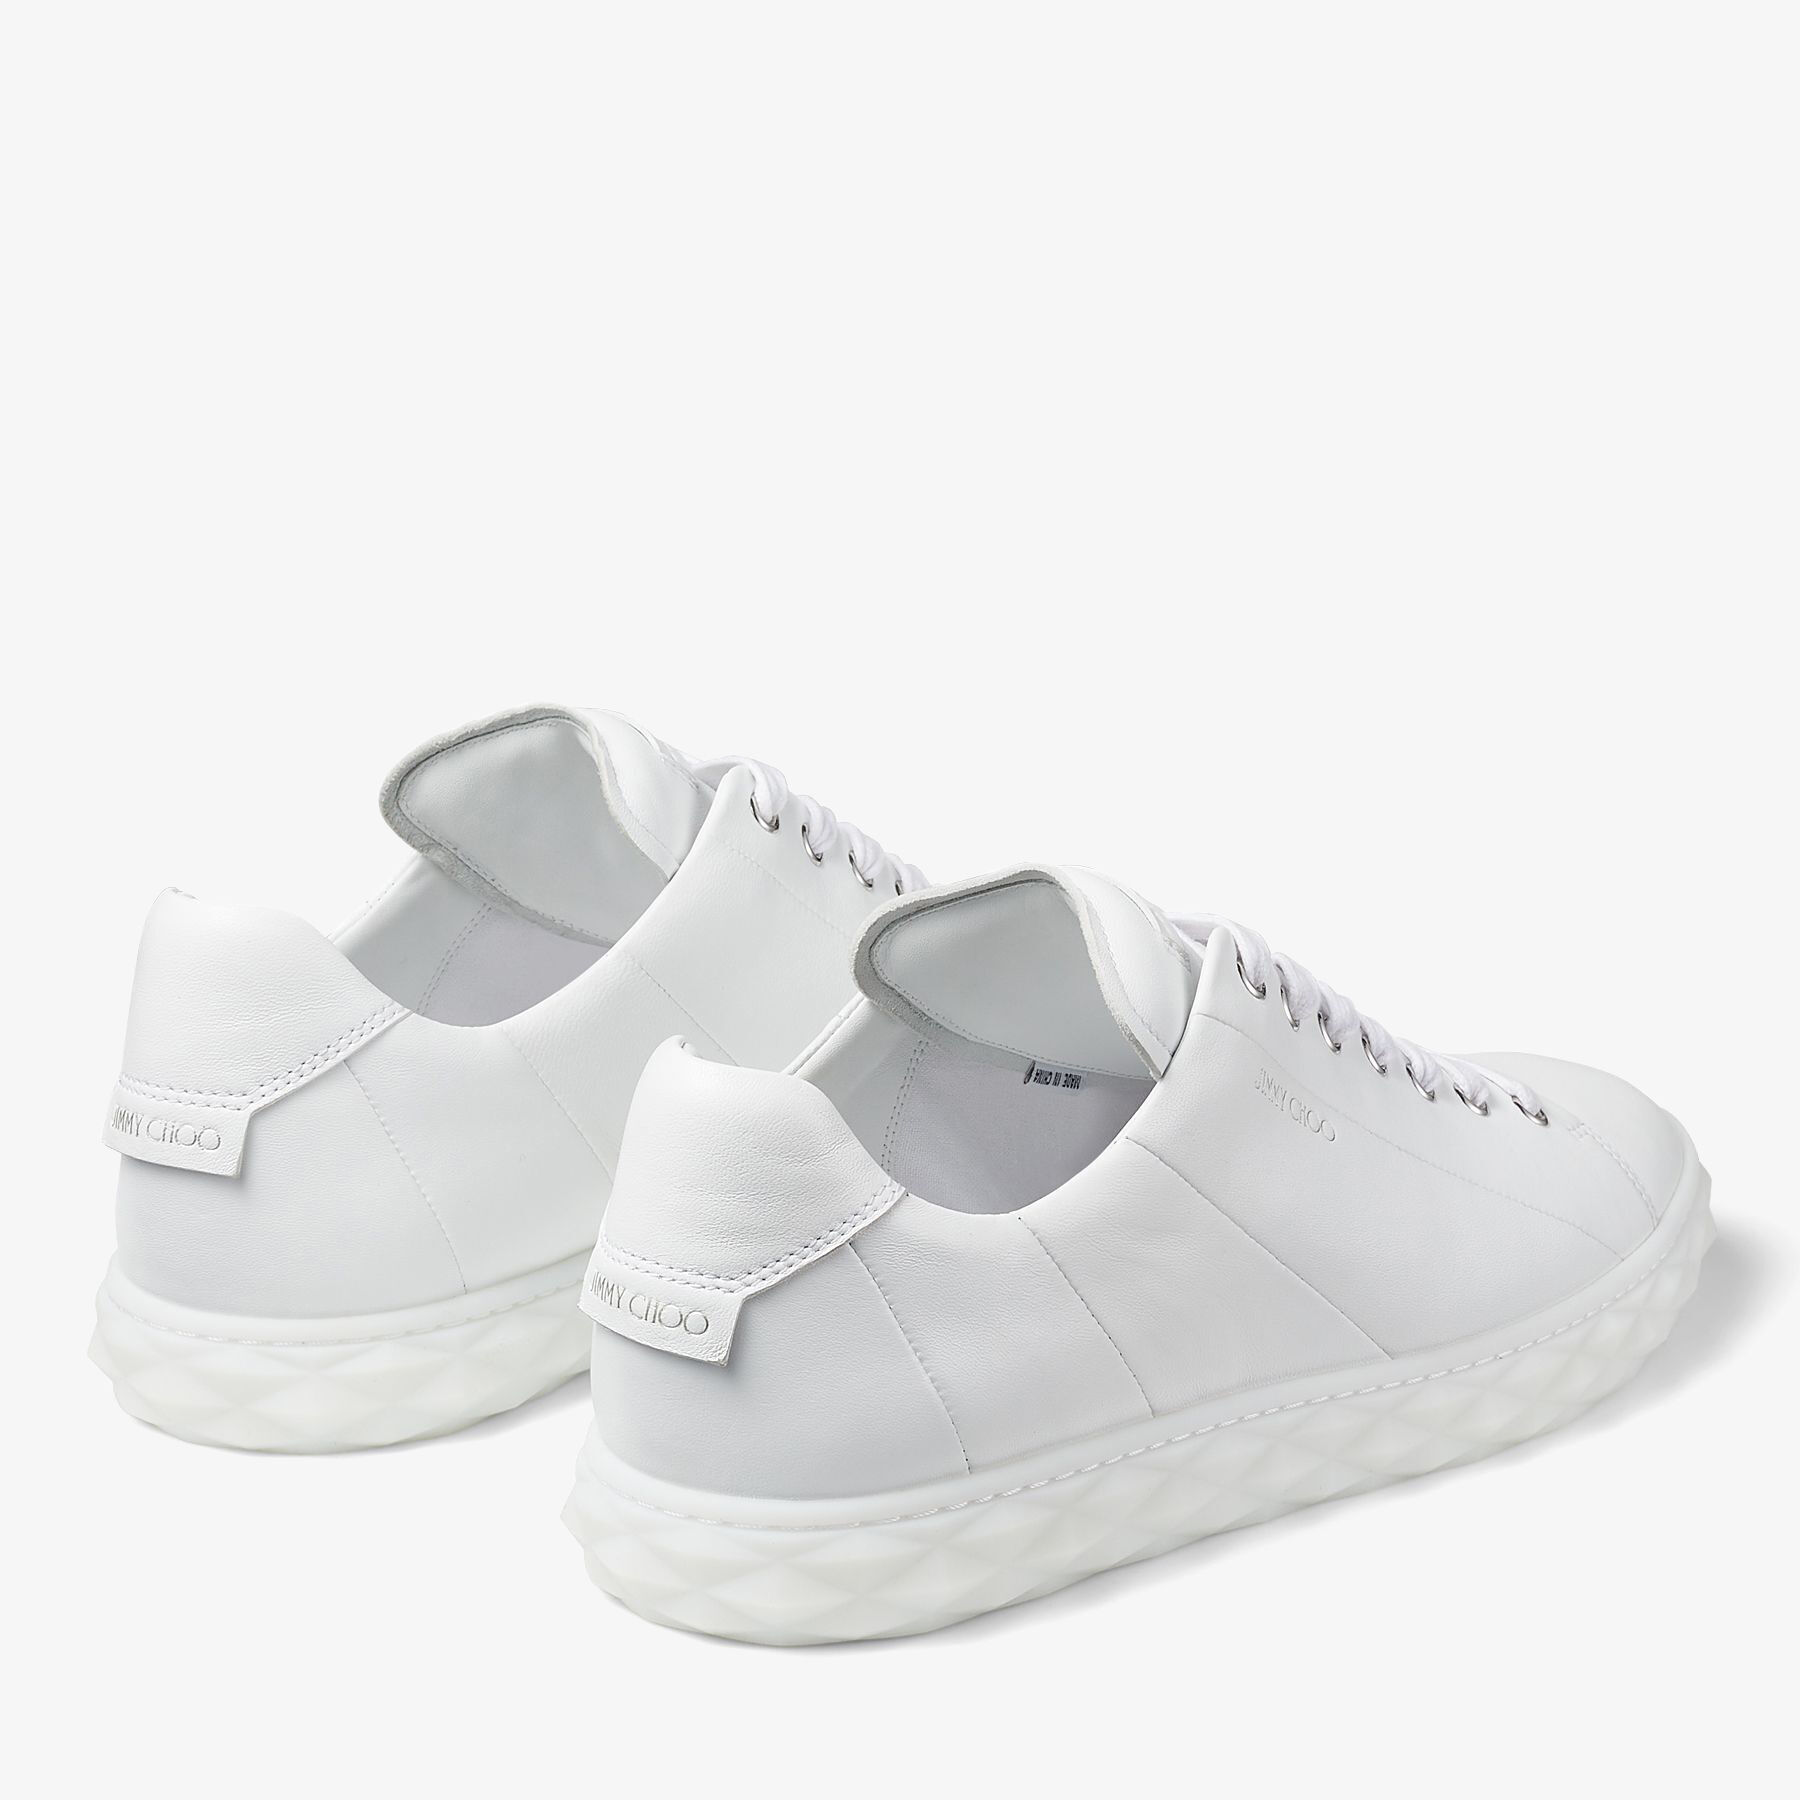 Latest Jimmy Choo Sport Shoes arrivals - Men - 2 products